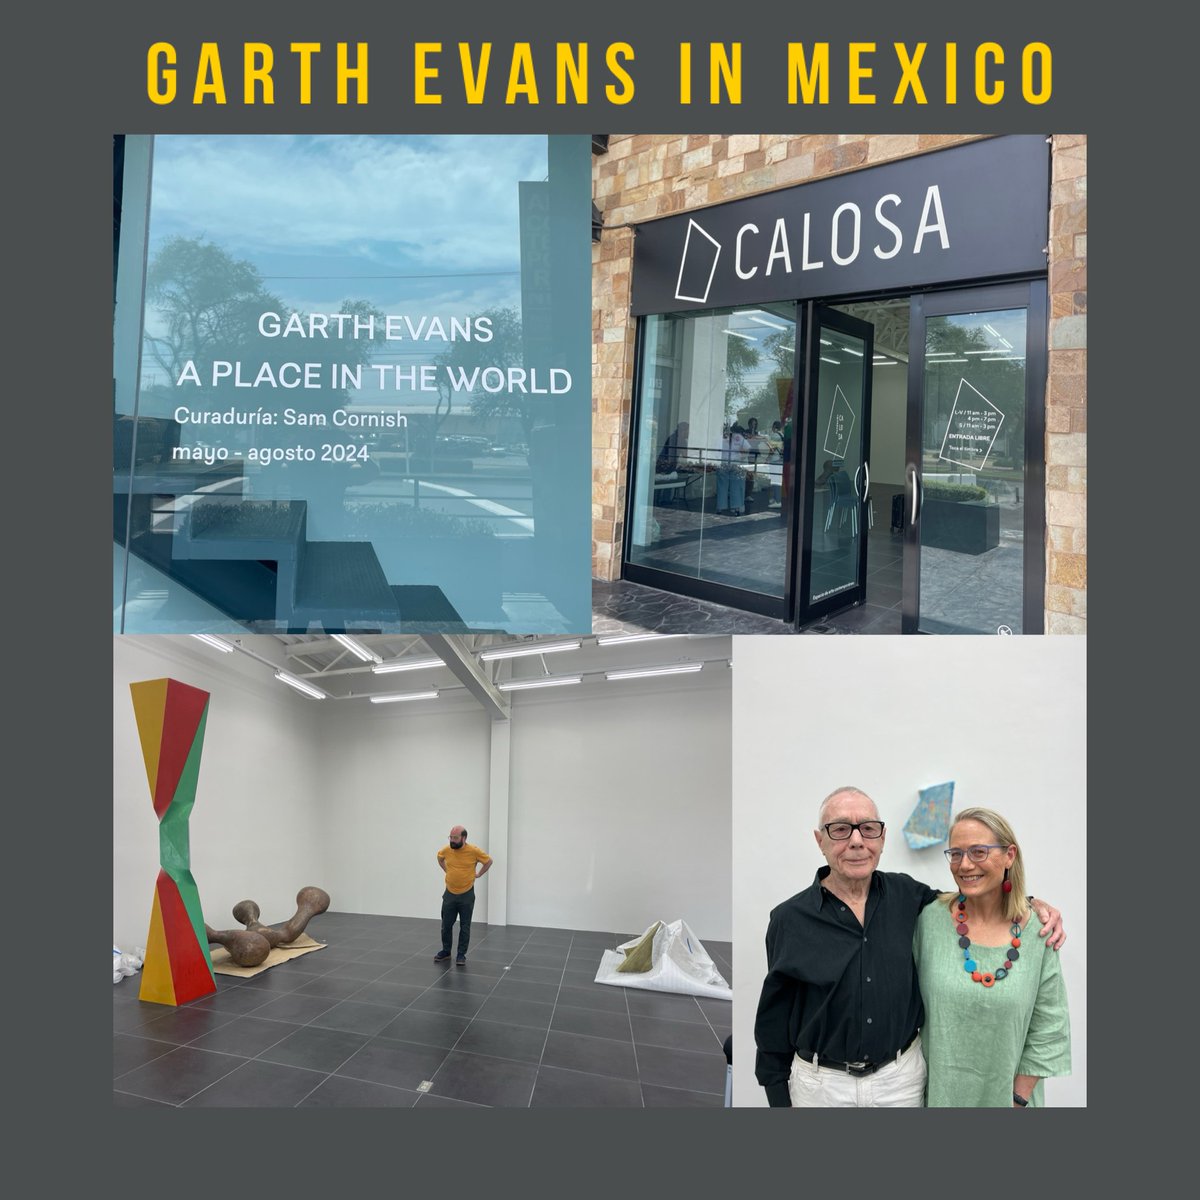 Garth's show at Fundación Calosa, an incredible gallery and art foundation in Irapuato, Mexico opened on May 4th. A brilliant job by UK curator Sam Cornish, who traveled from London to curate the show. So amazing to watch it all come together and visit this amazing area of Mexico